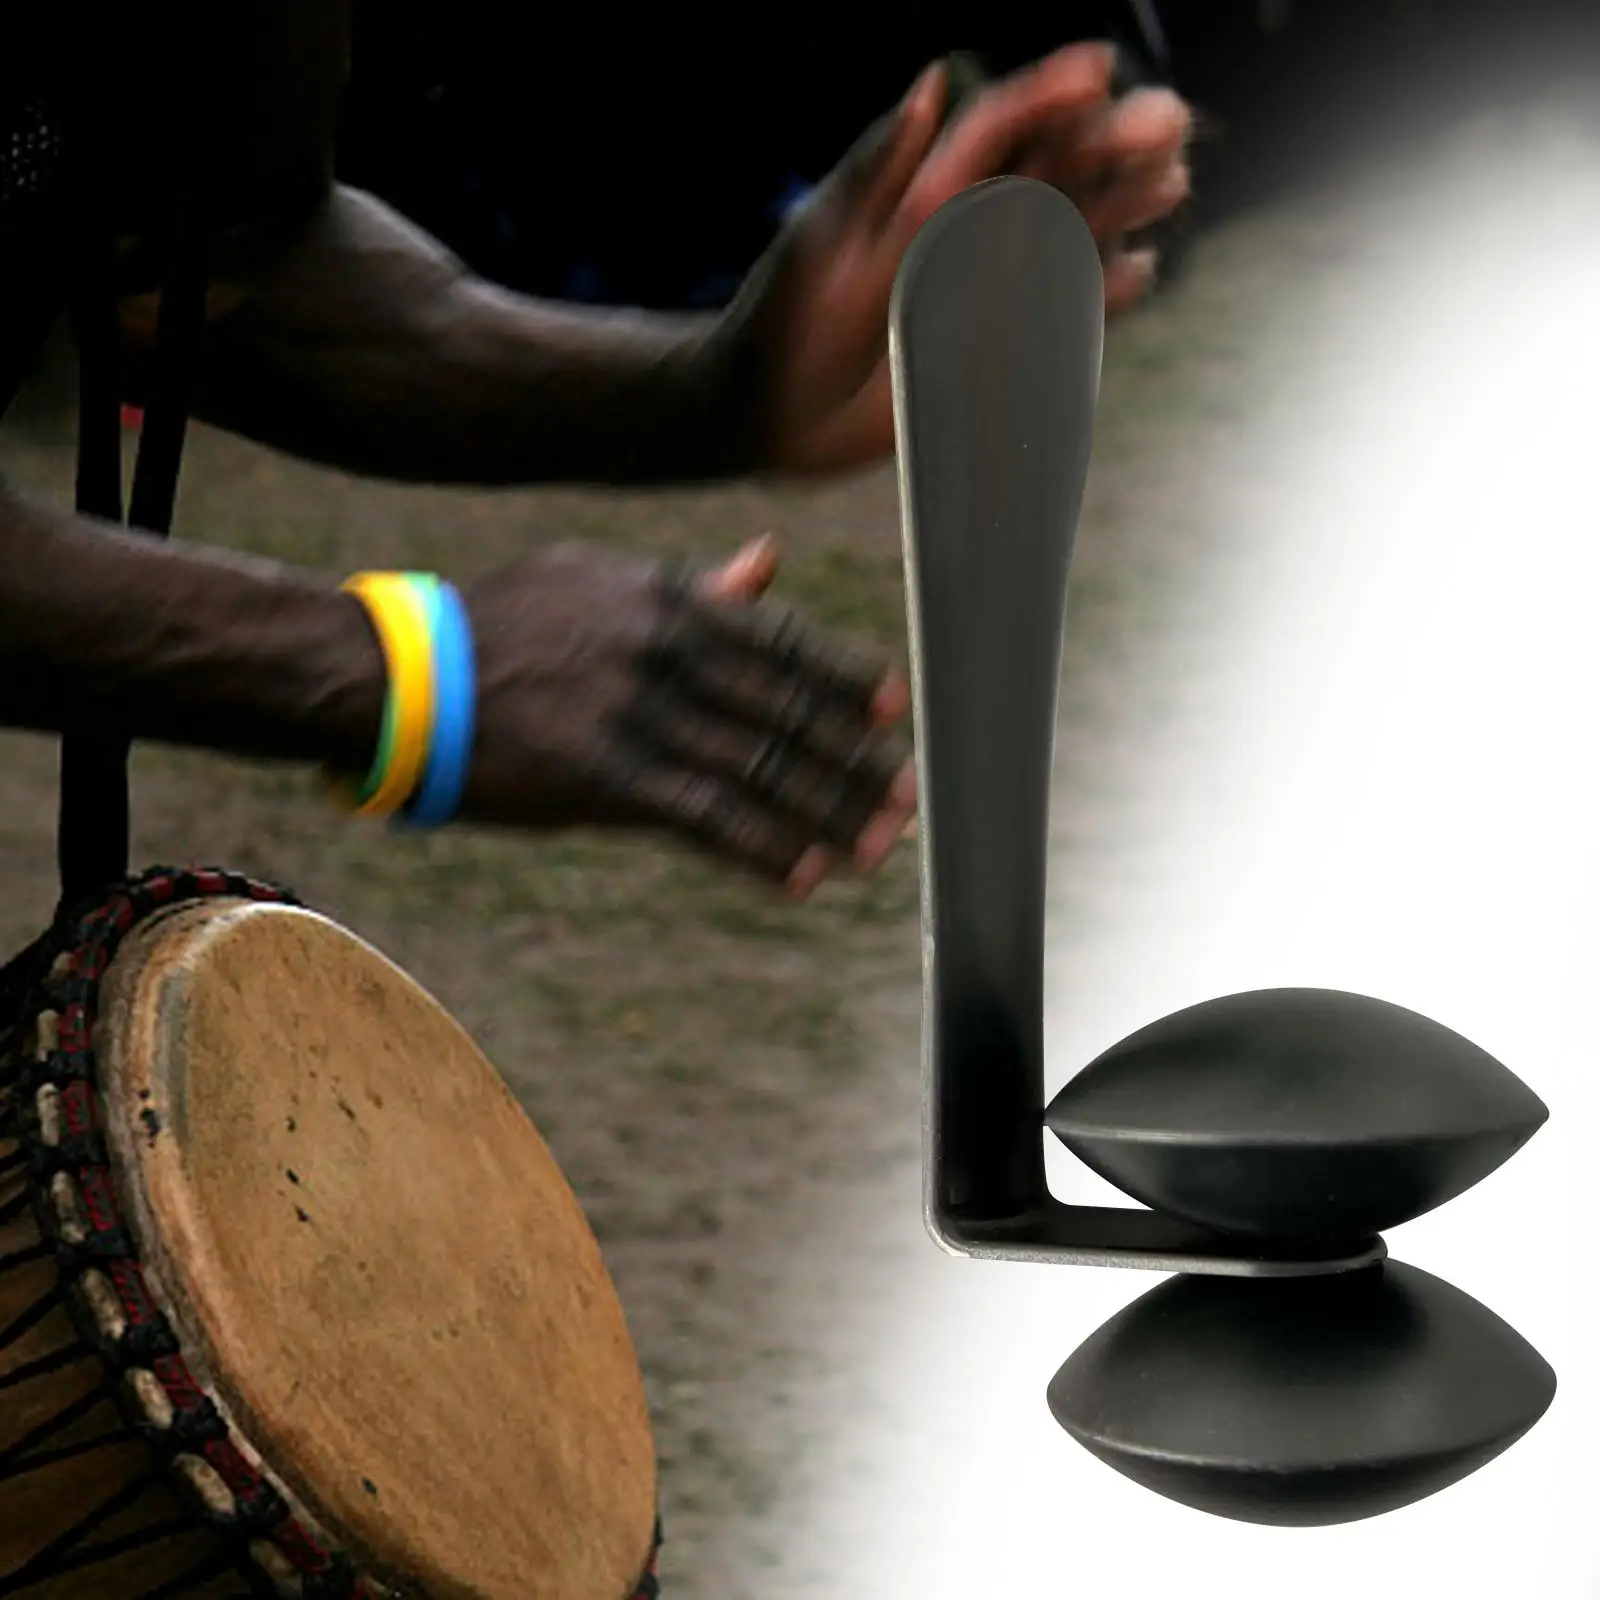 Percussion Heel Shaker Percussion Rhythm Shakers Rattles Rhythm Percussion foot shakers for Drummers Percussion Ensembles Drums